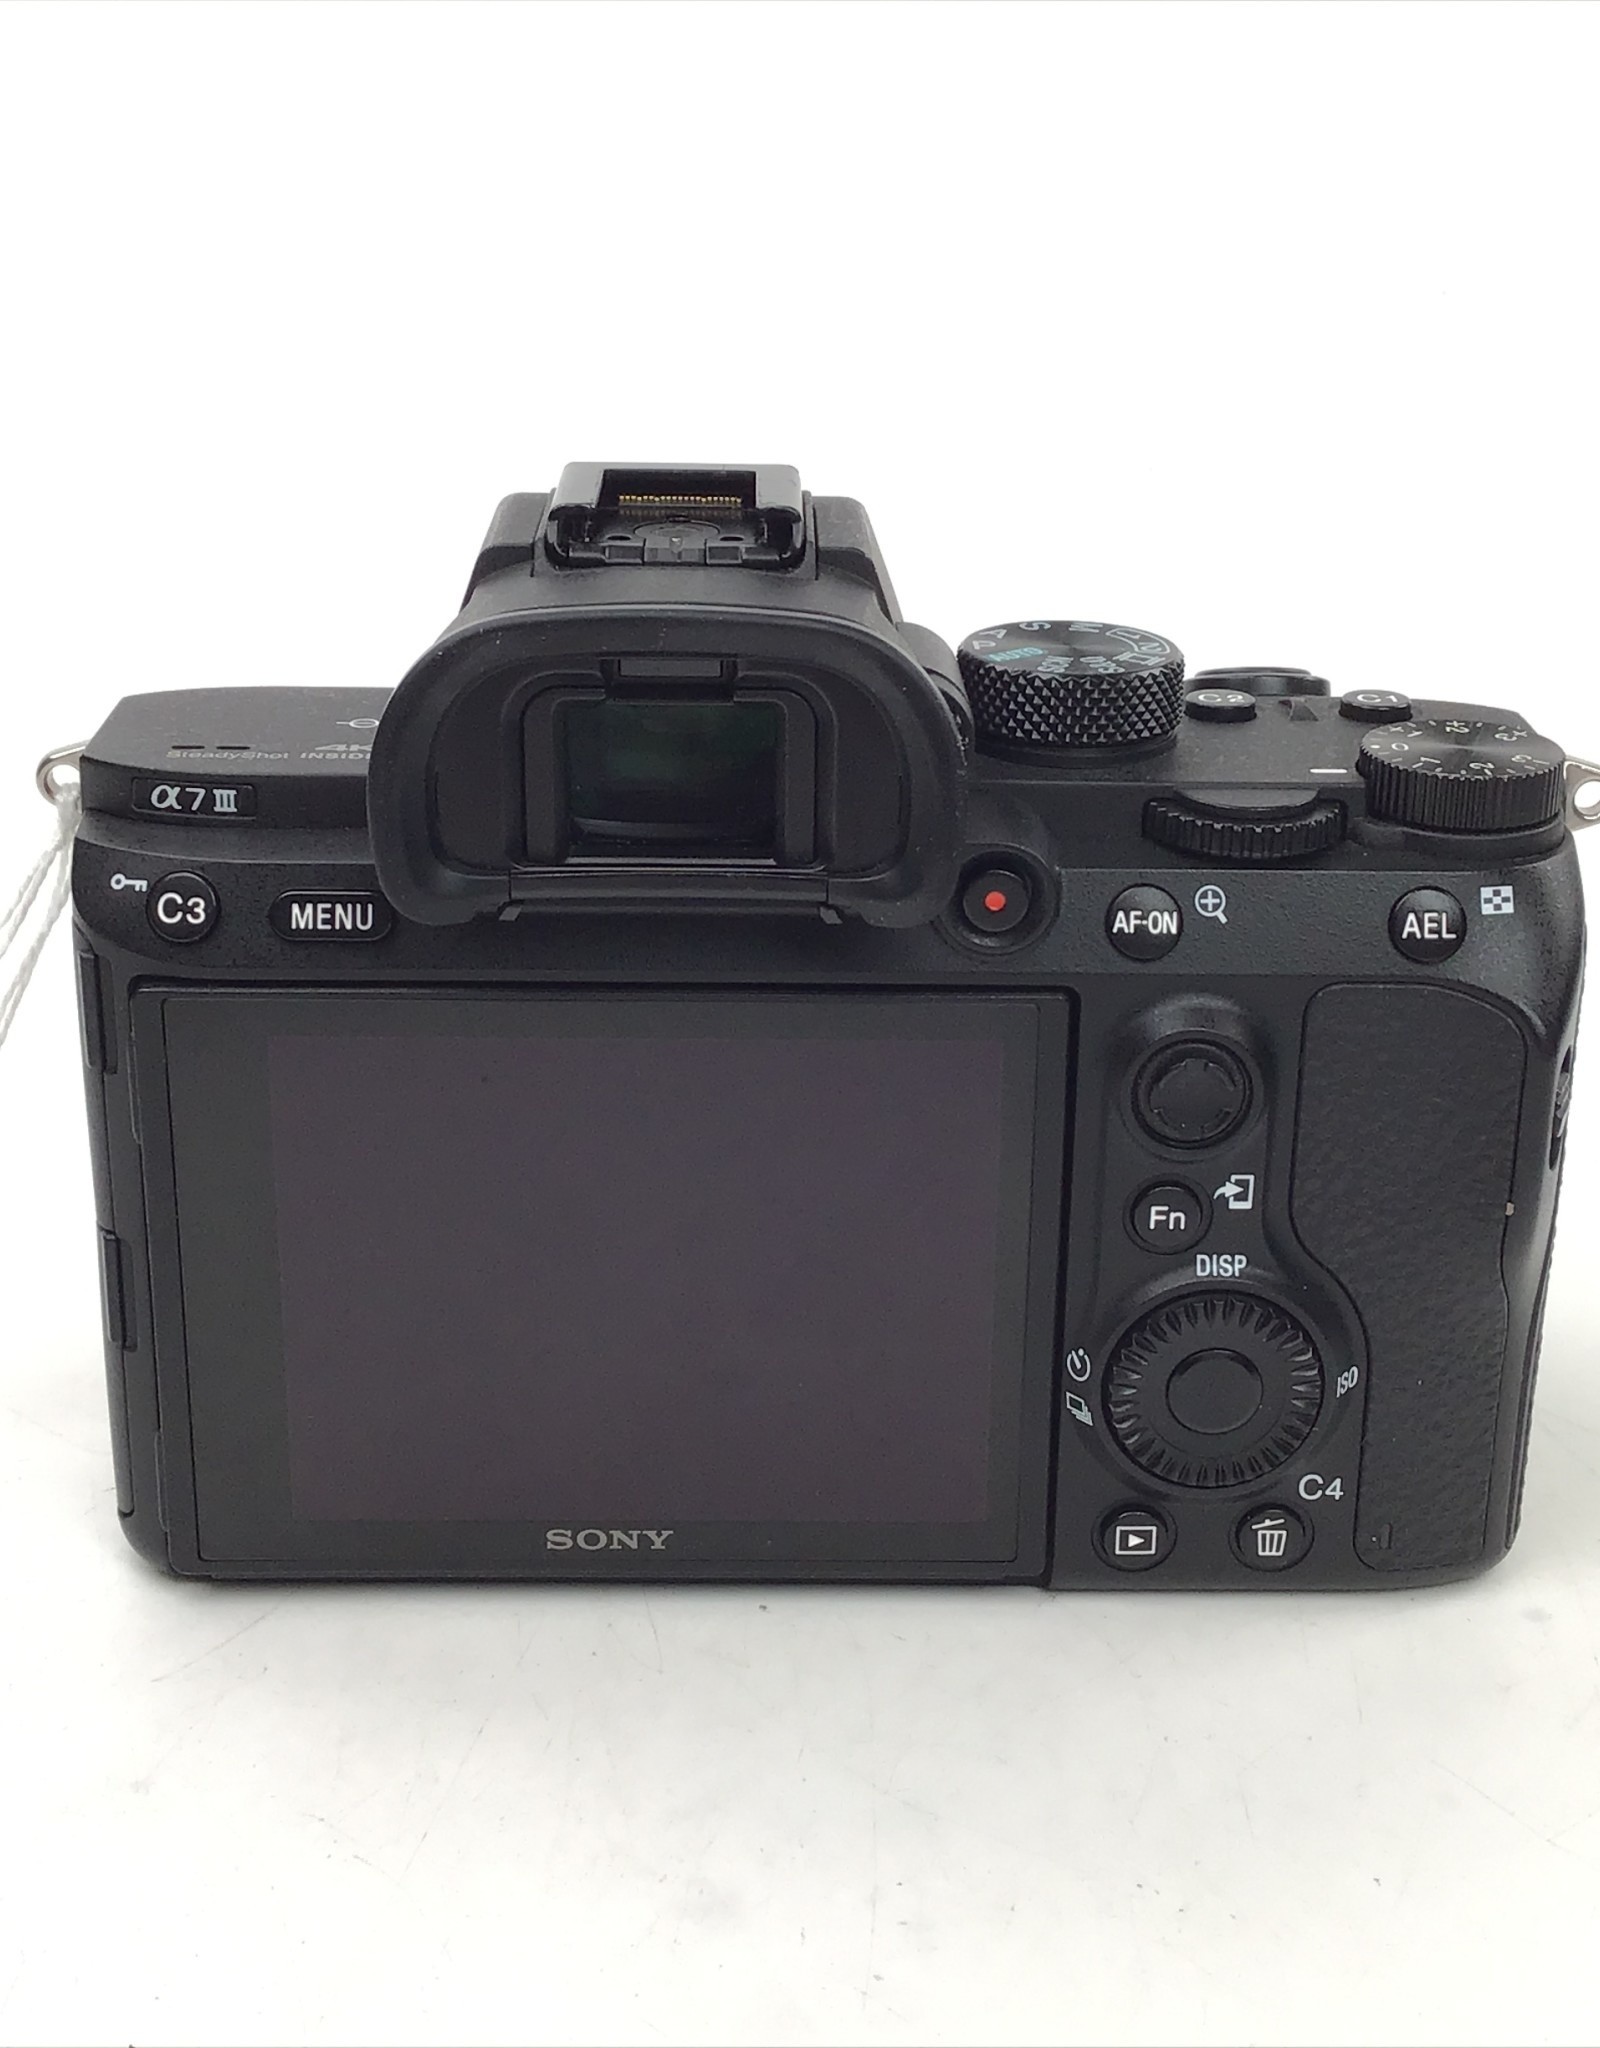 SONY Sony A7 III Camera Body Shutter Count 28,486 Used Good